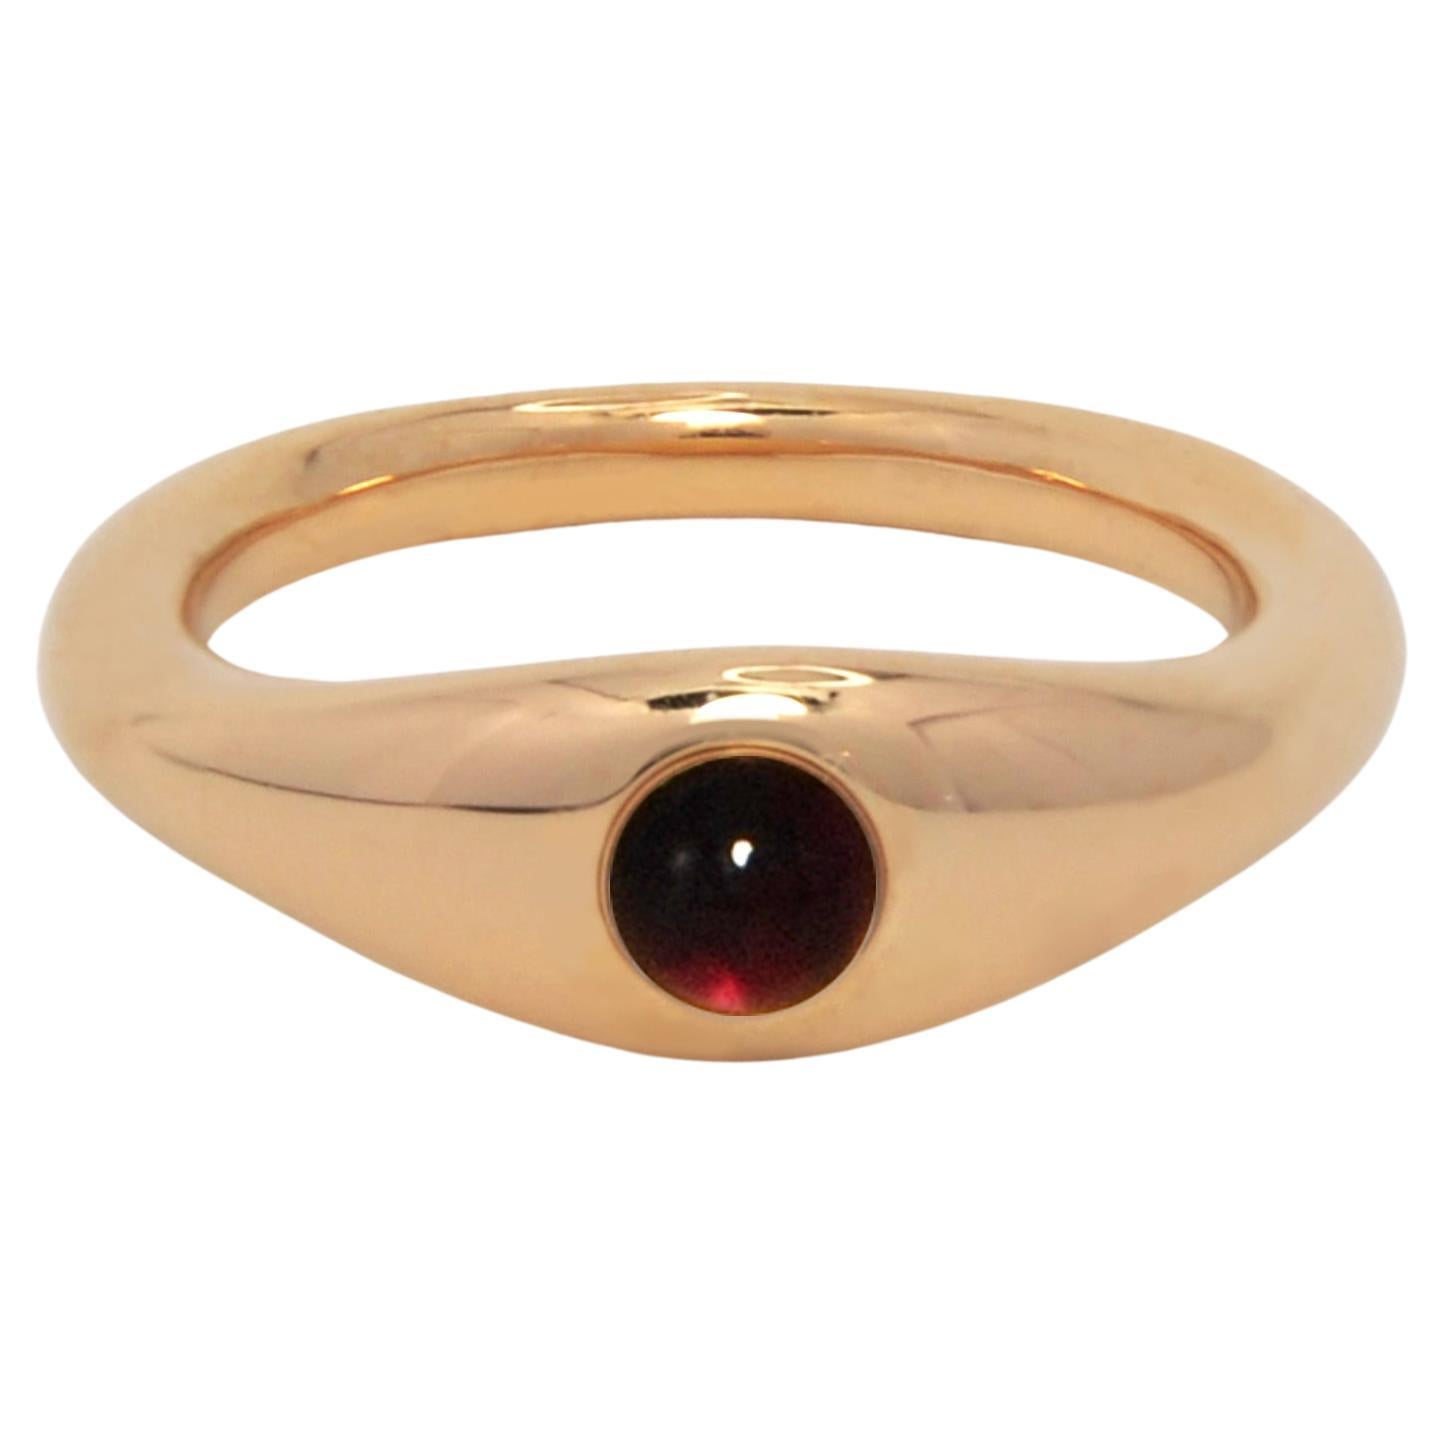 For Sale:  Ruth Nyc Lun Ring, 14k Yellow Gold and Garnet Ring